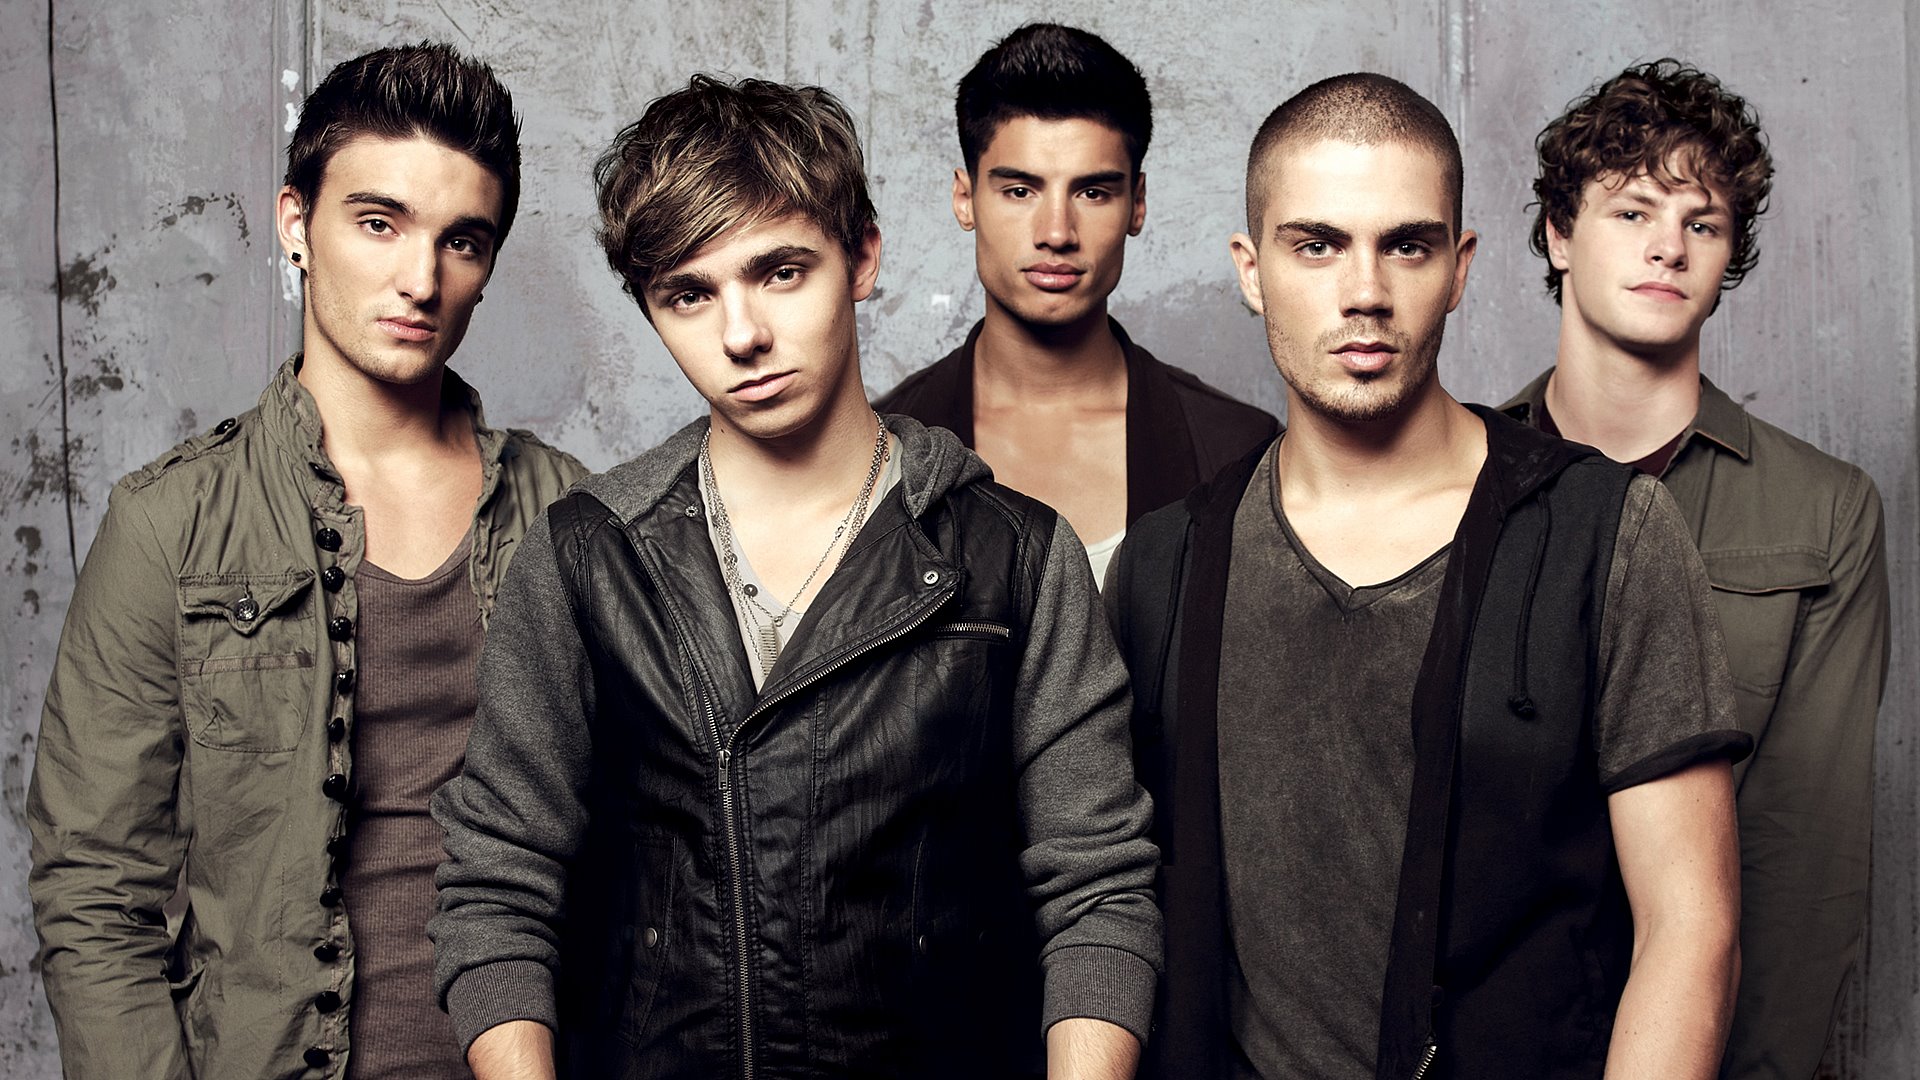 The-Wanted-xx-the-wanted-32887891-1920-1080.jpg